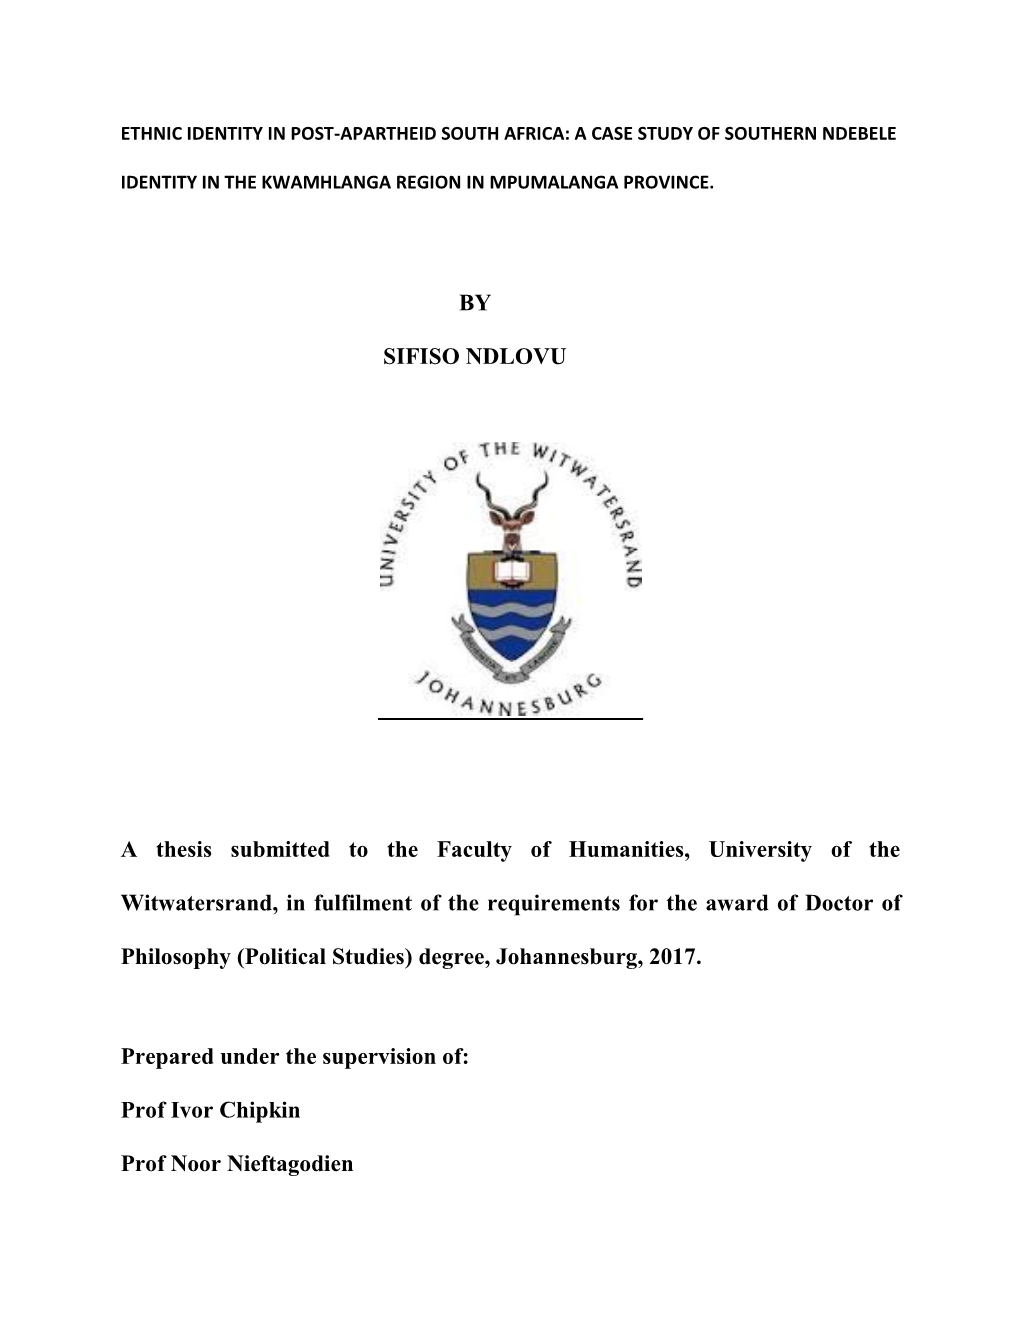 BY SIFISO NDLOVU a Thesis Submitted to the Faculty Of